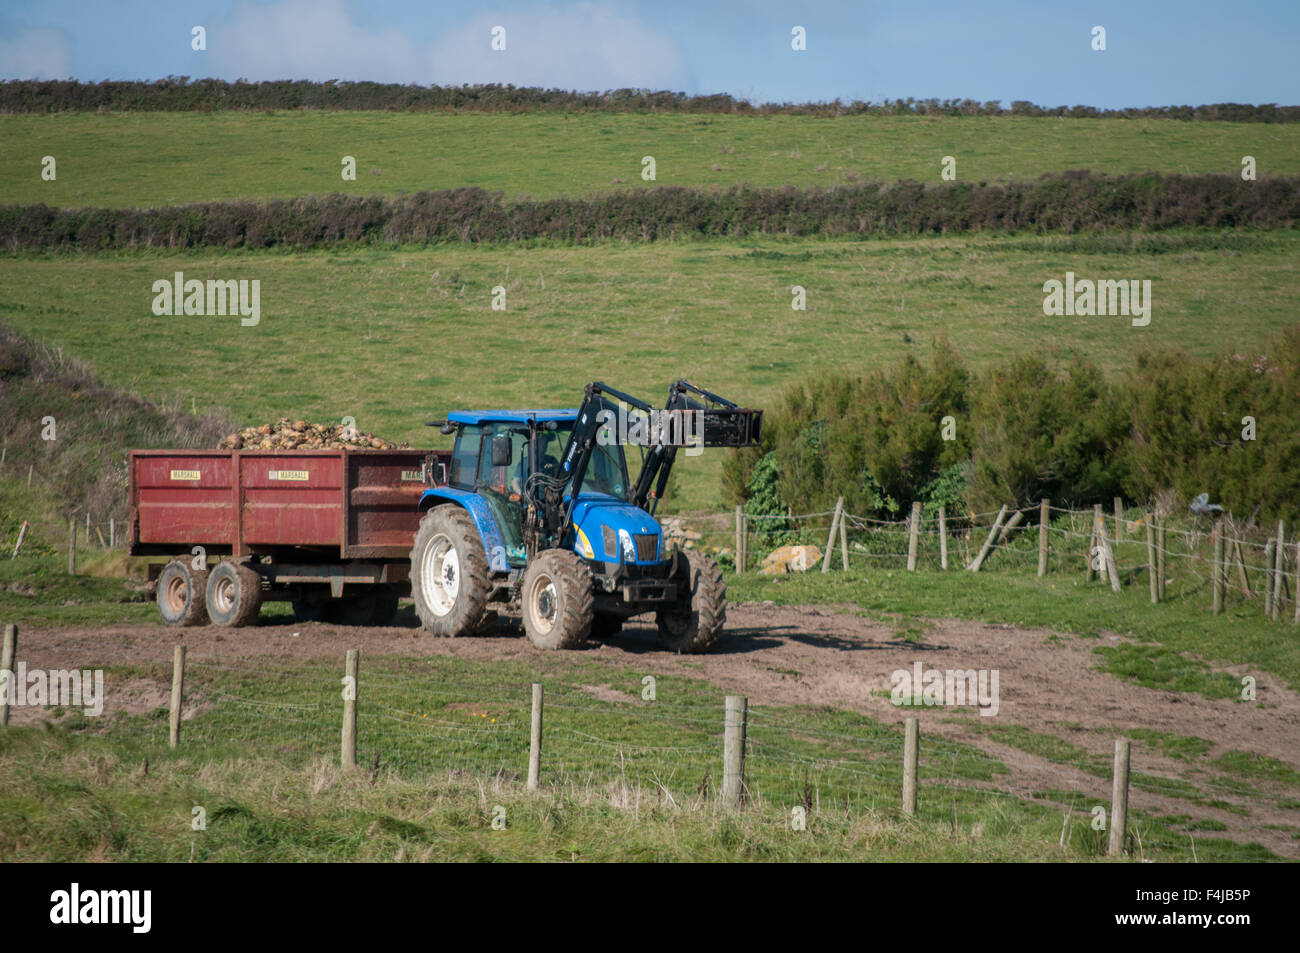 A tractor bringing turnips in from the field Stock Photo